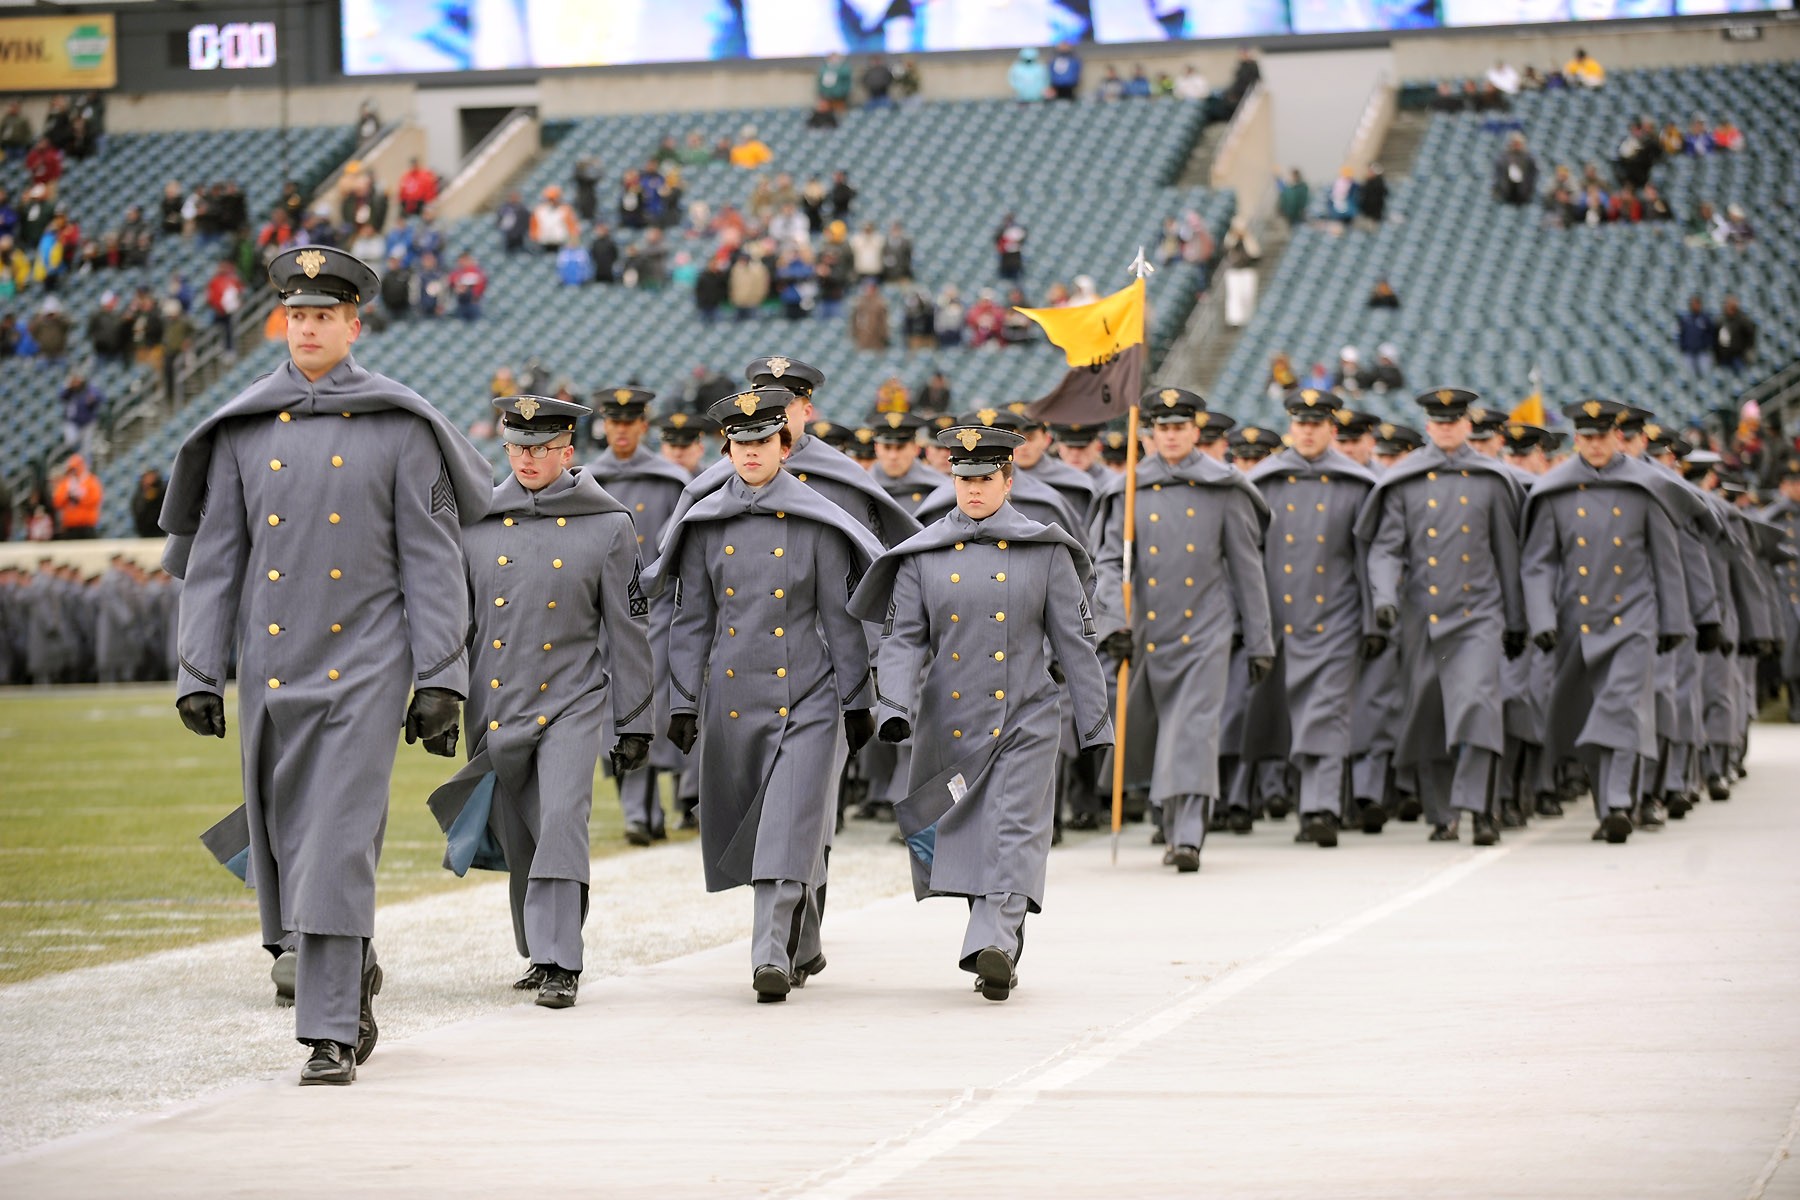 Army and Navy's uniforms for 2013 game